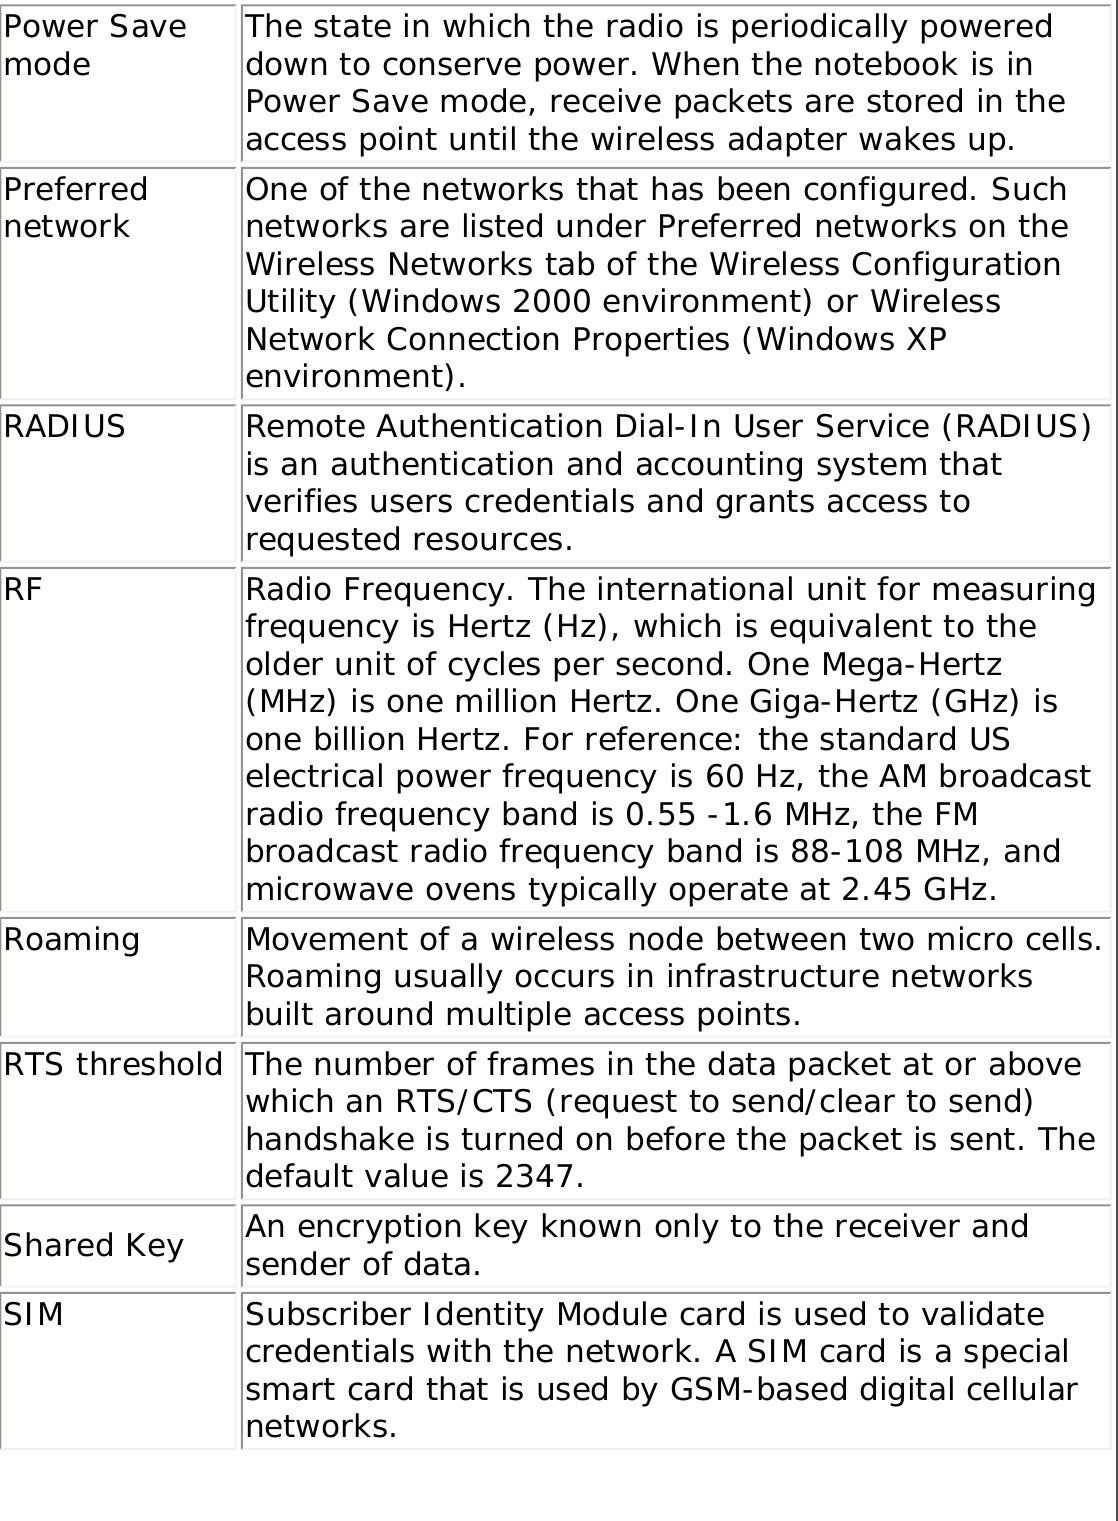 Power Save mode The state in which the radio is periodically powered down to conserve power. When the notebook is in Power Save mode, receive packets are stored in the access point until the wireless adapter wakes up.Preferred network One of the networks that has been configured. Such networks are listed under Preferred networks on the Wireless Networks tab of the Wireless Configuration Utility (Windows 2000 environment) or Wireless Network Connection Properties (Windows XP environment).RADIUS Remote Authentication Dial-In User Service (RADIUS) is an authentication and accounting system that verifies users credentials and grants access to requested resources.RF Radio Frequency. The international unit for measuring frequency is Hertz (Hz), which is equivalent to the older unit of cycles per second. One Mega-Hertz (MHz) is one million Hertz. One Giga-Hertz (GHz) is one billion Hertz. For reference: the standard US electrical power frequency is 60 Hz, the AM broadcast radio frequency band is 0.55 -1.6 MHz, the FM broadcast radio frequency band is 88-108 MHz, and microwave ovens typically operate at 2.45 GHz. Roaming Movement of a wireless node between two micro cells. Roaming usually occurs in infrastructure networks built around multiple access points.RTS threshold The number of frames in the data packet at or above which an RTS/CTS (request to send/clear to send) handshake is turned on before the packet is sent. The default value is 2347.Shared Key An encryption key known only to the receiver and sender of data.SIM Subscriber Identity Module card is used to validate credentials with the network. A SIM card is a special smart card that is used by GSM-based digital cellular networks.